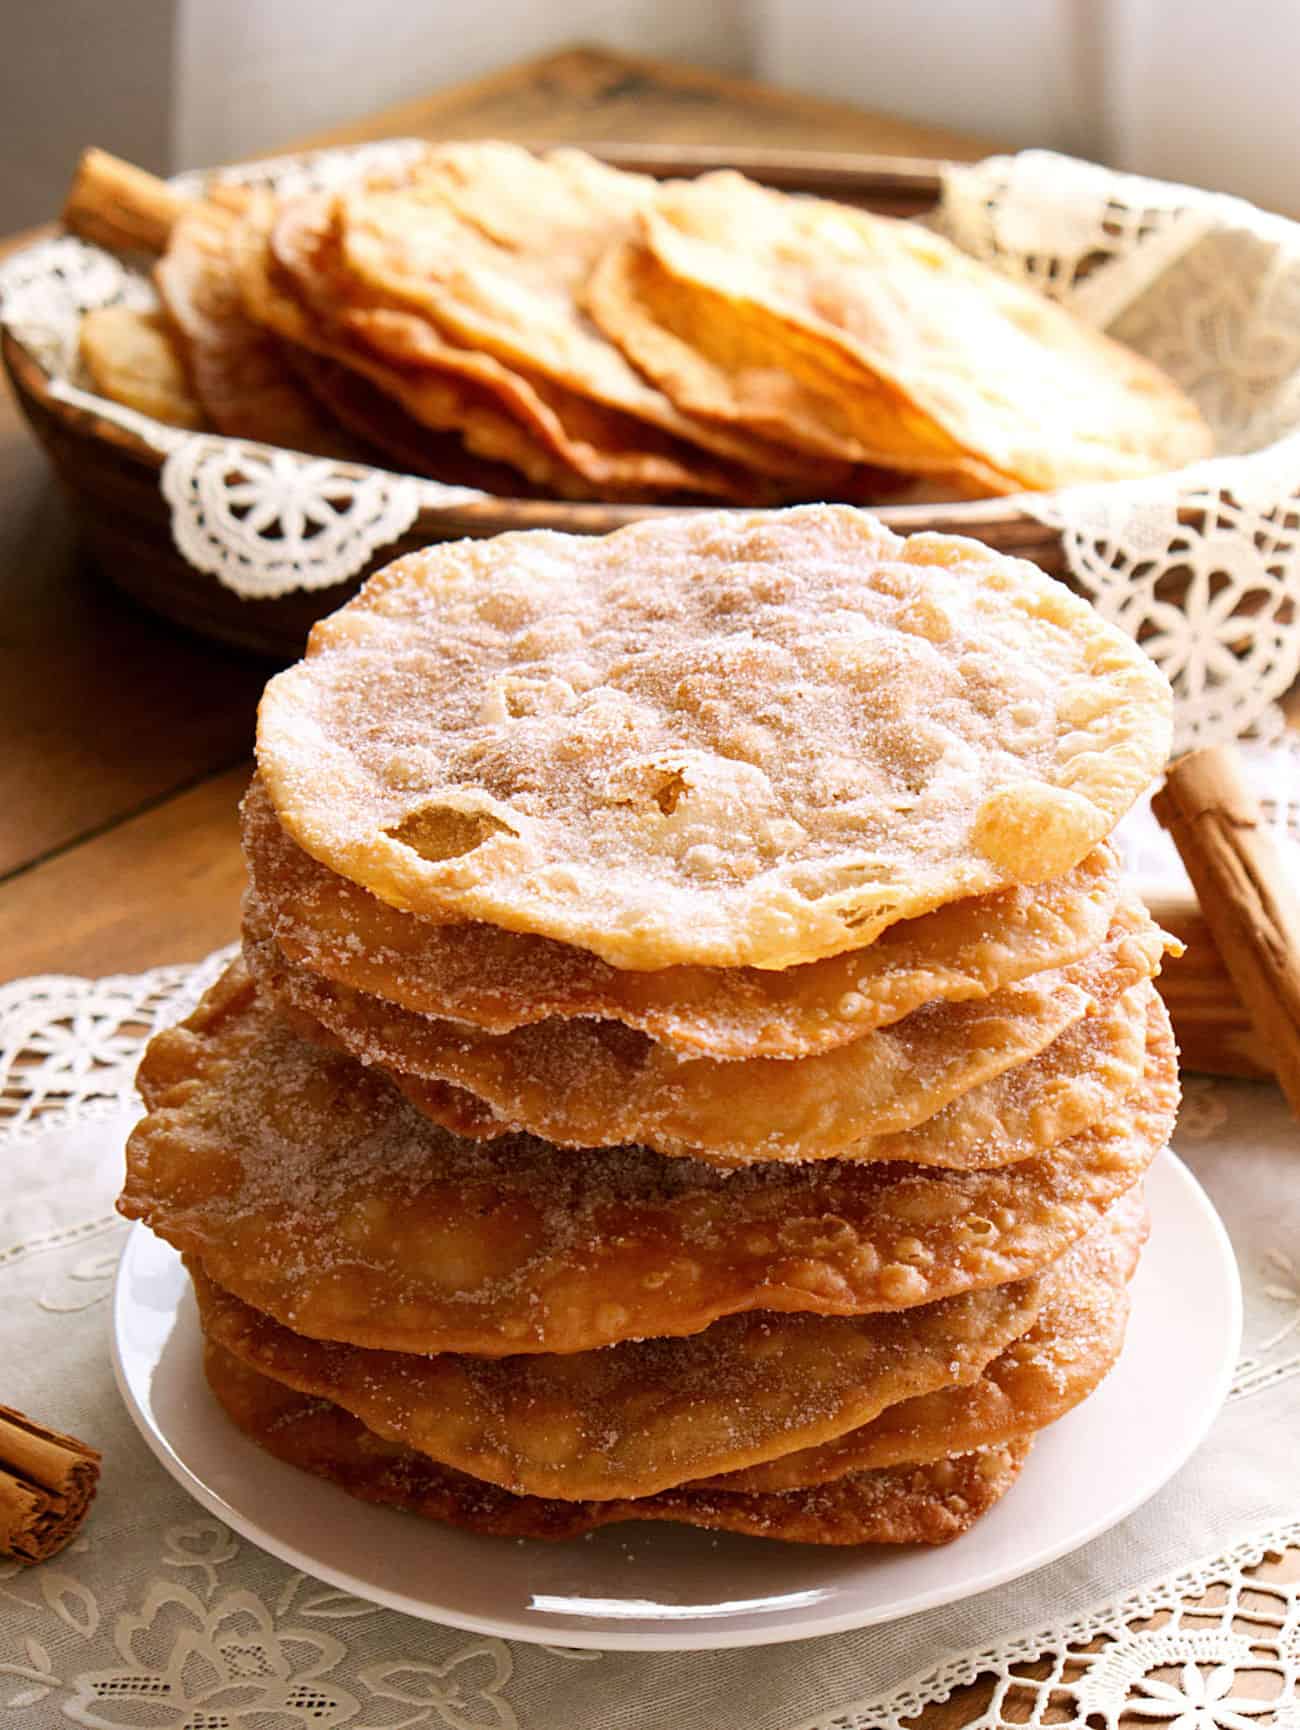 authentic bunuelos (Mexican fritters) dusted with a cinnamon sugar piled high on a plate with a basket behind with even more buñulelos.